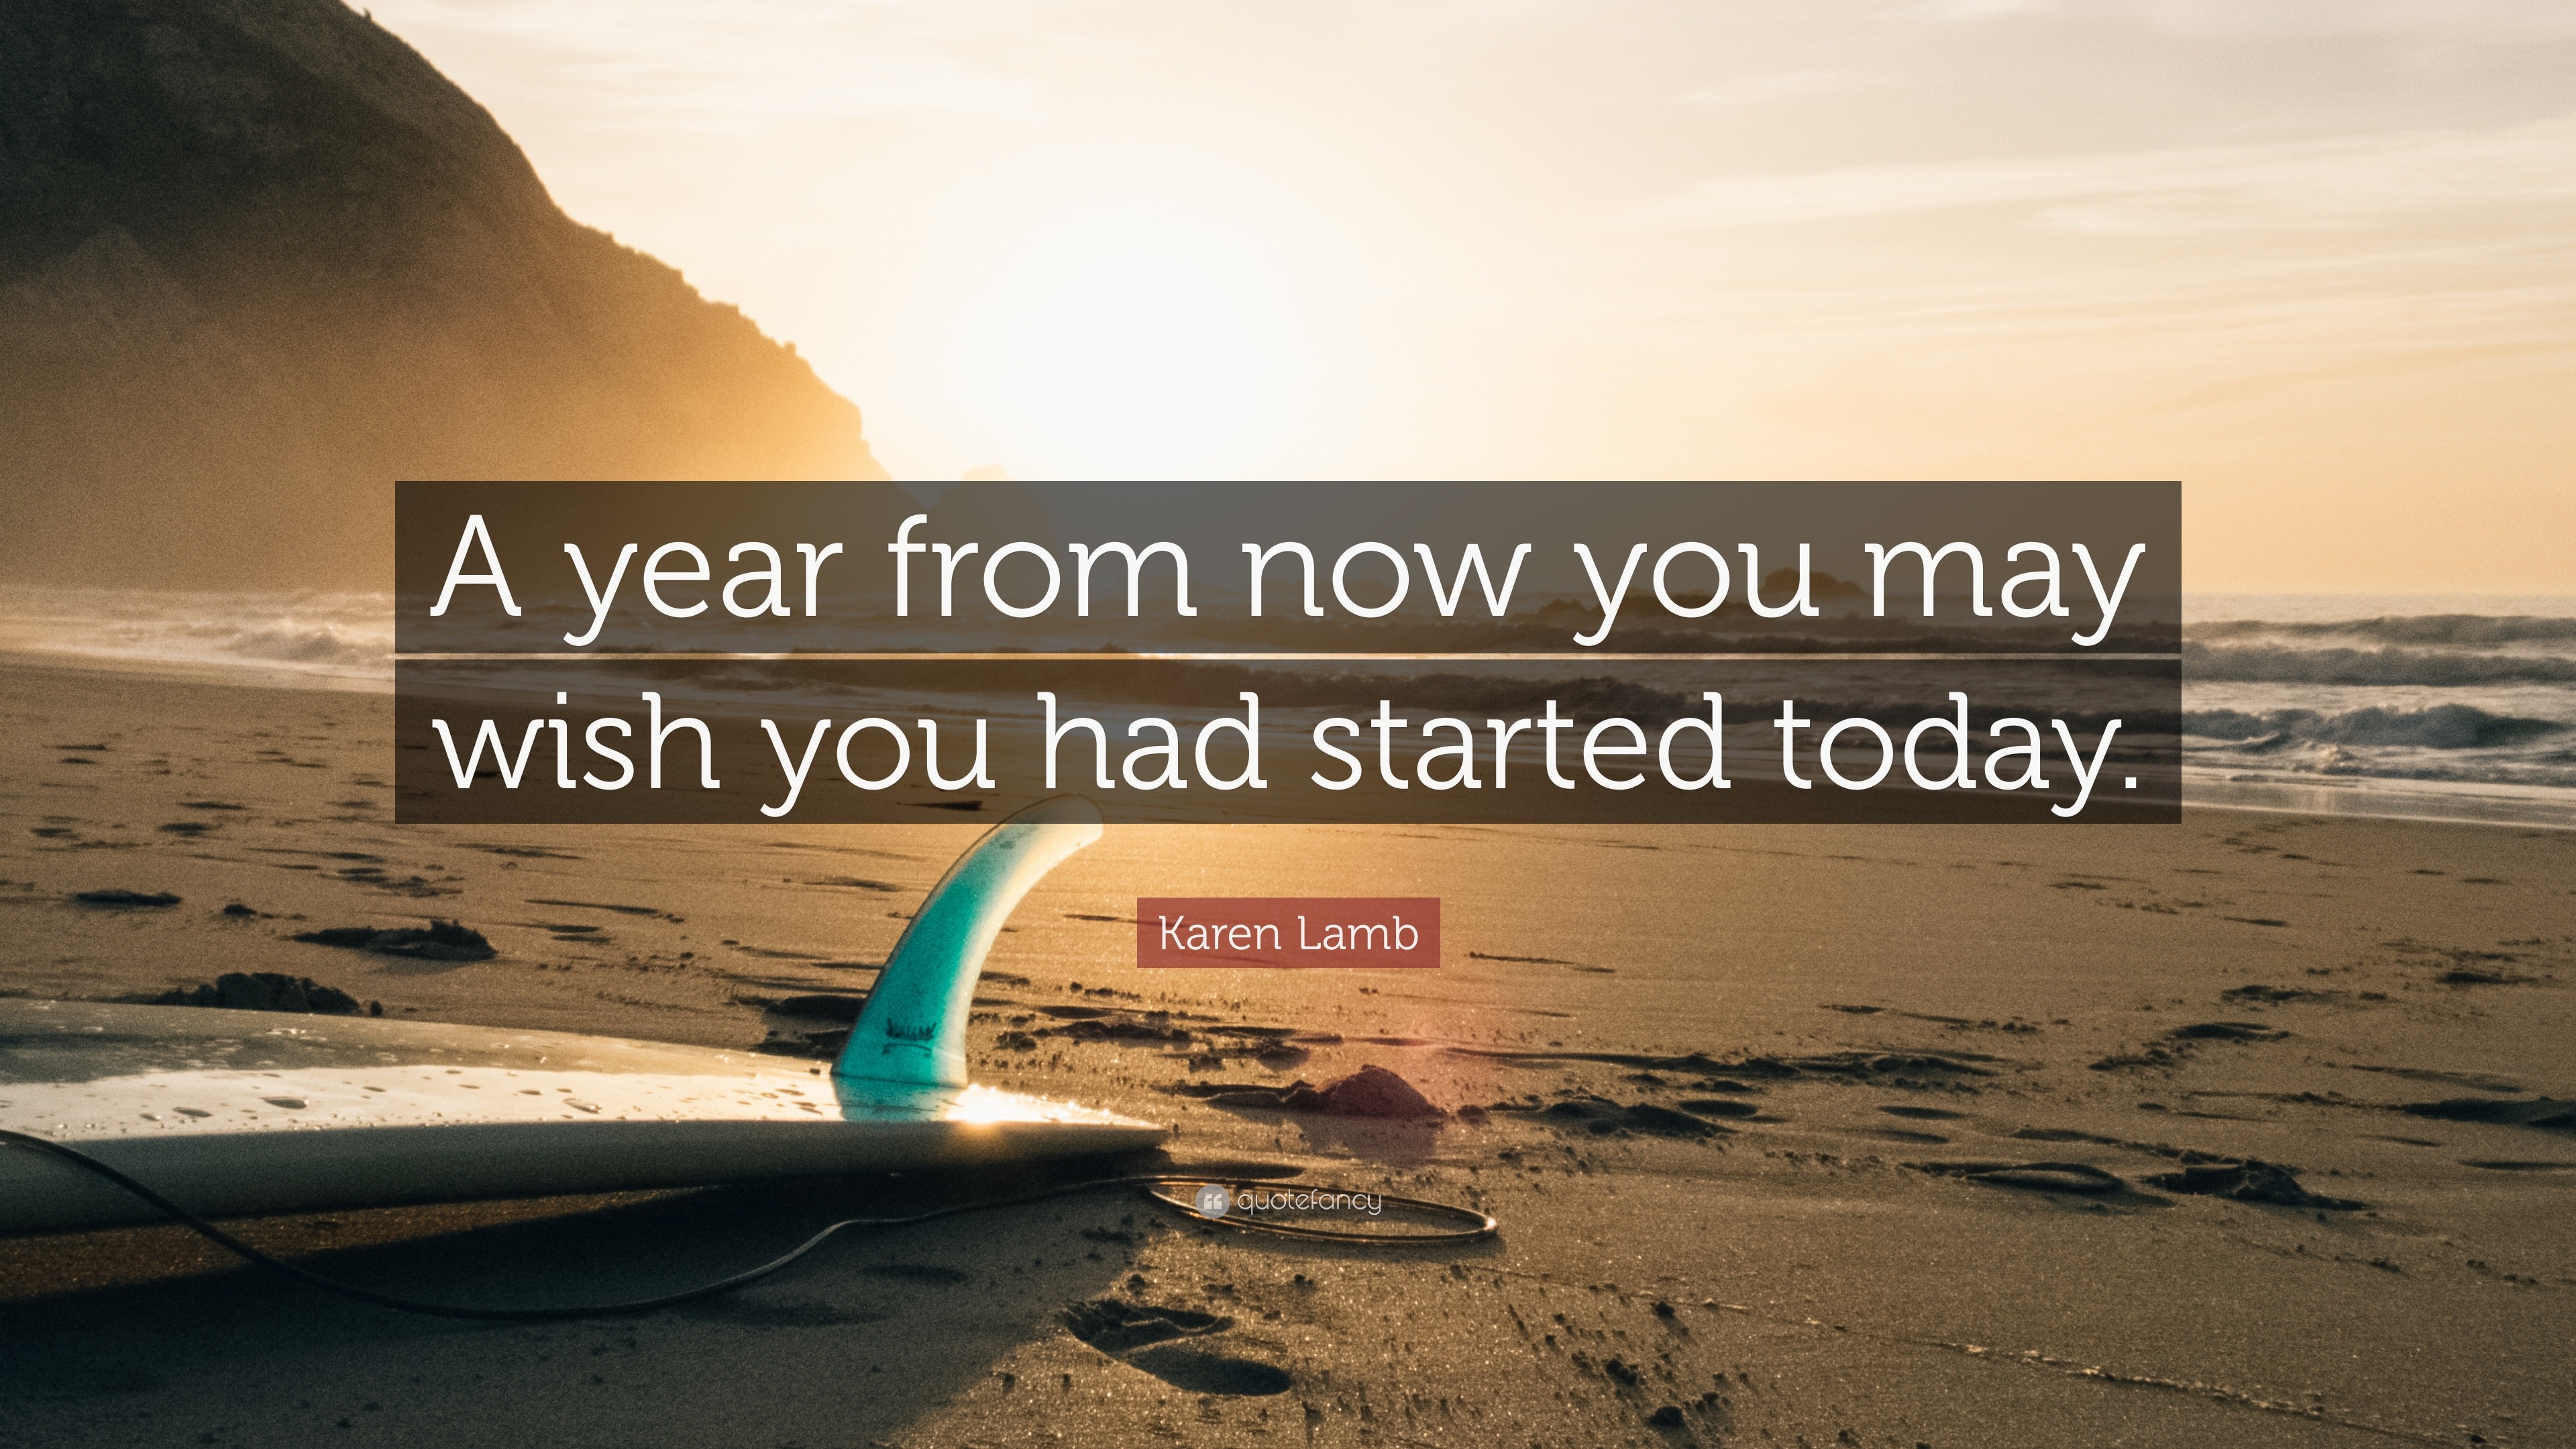 Karen Lamb Quote: “A year from now you may wish you had started today.”